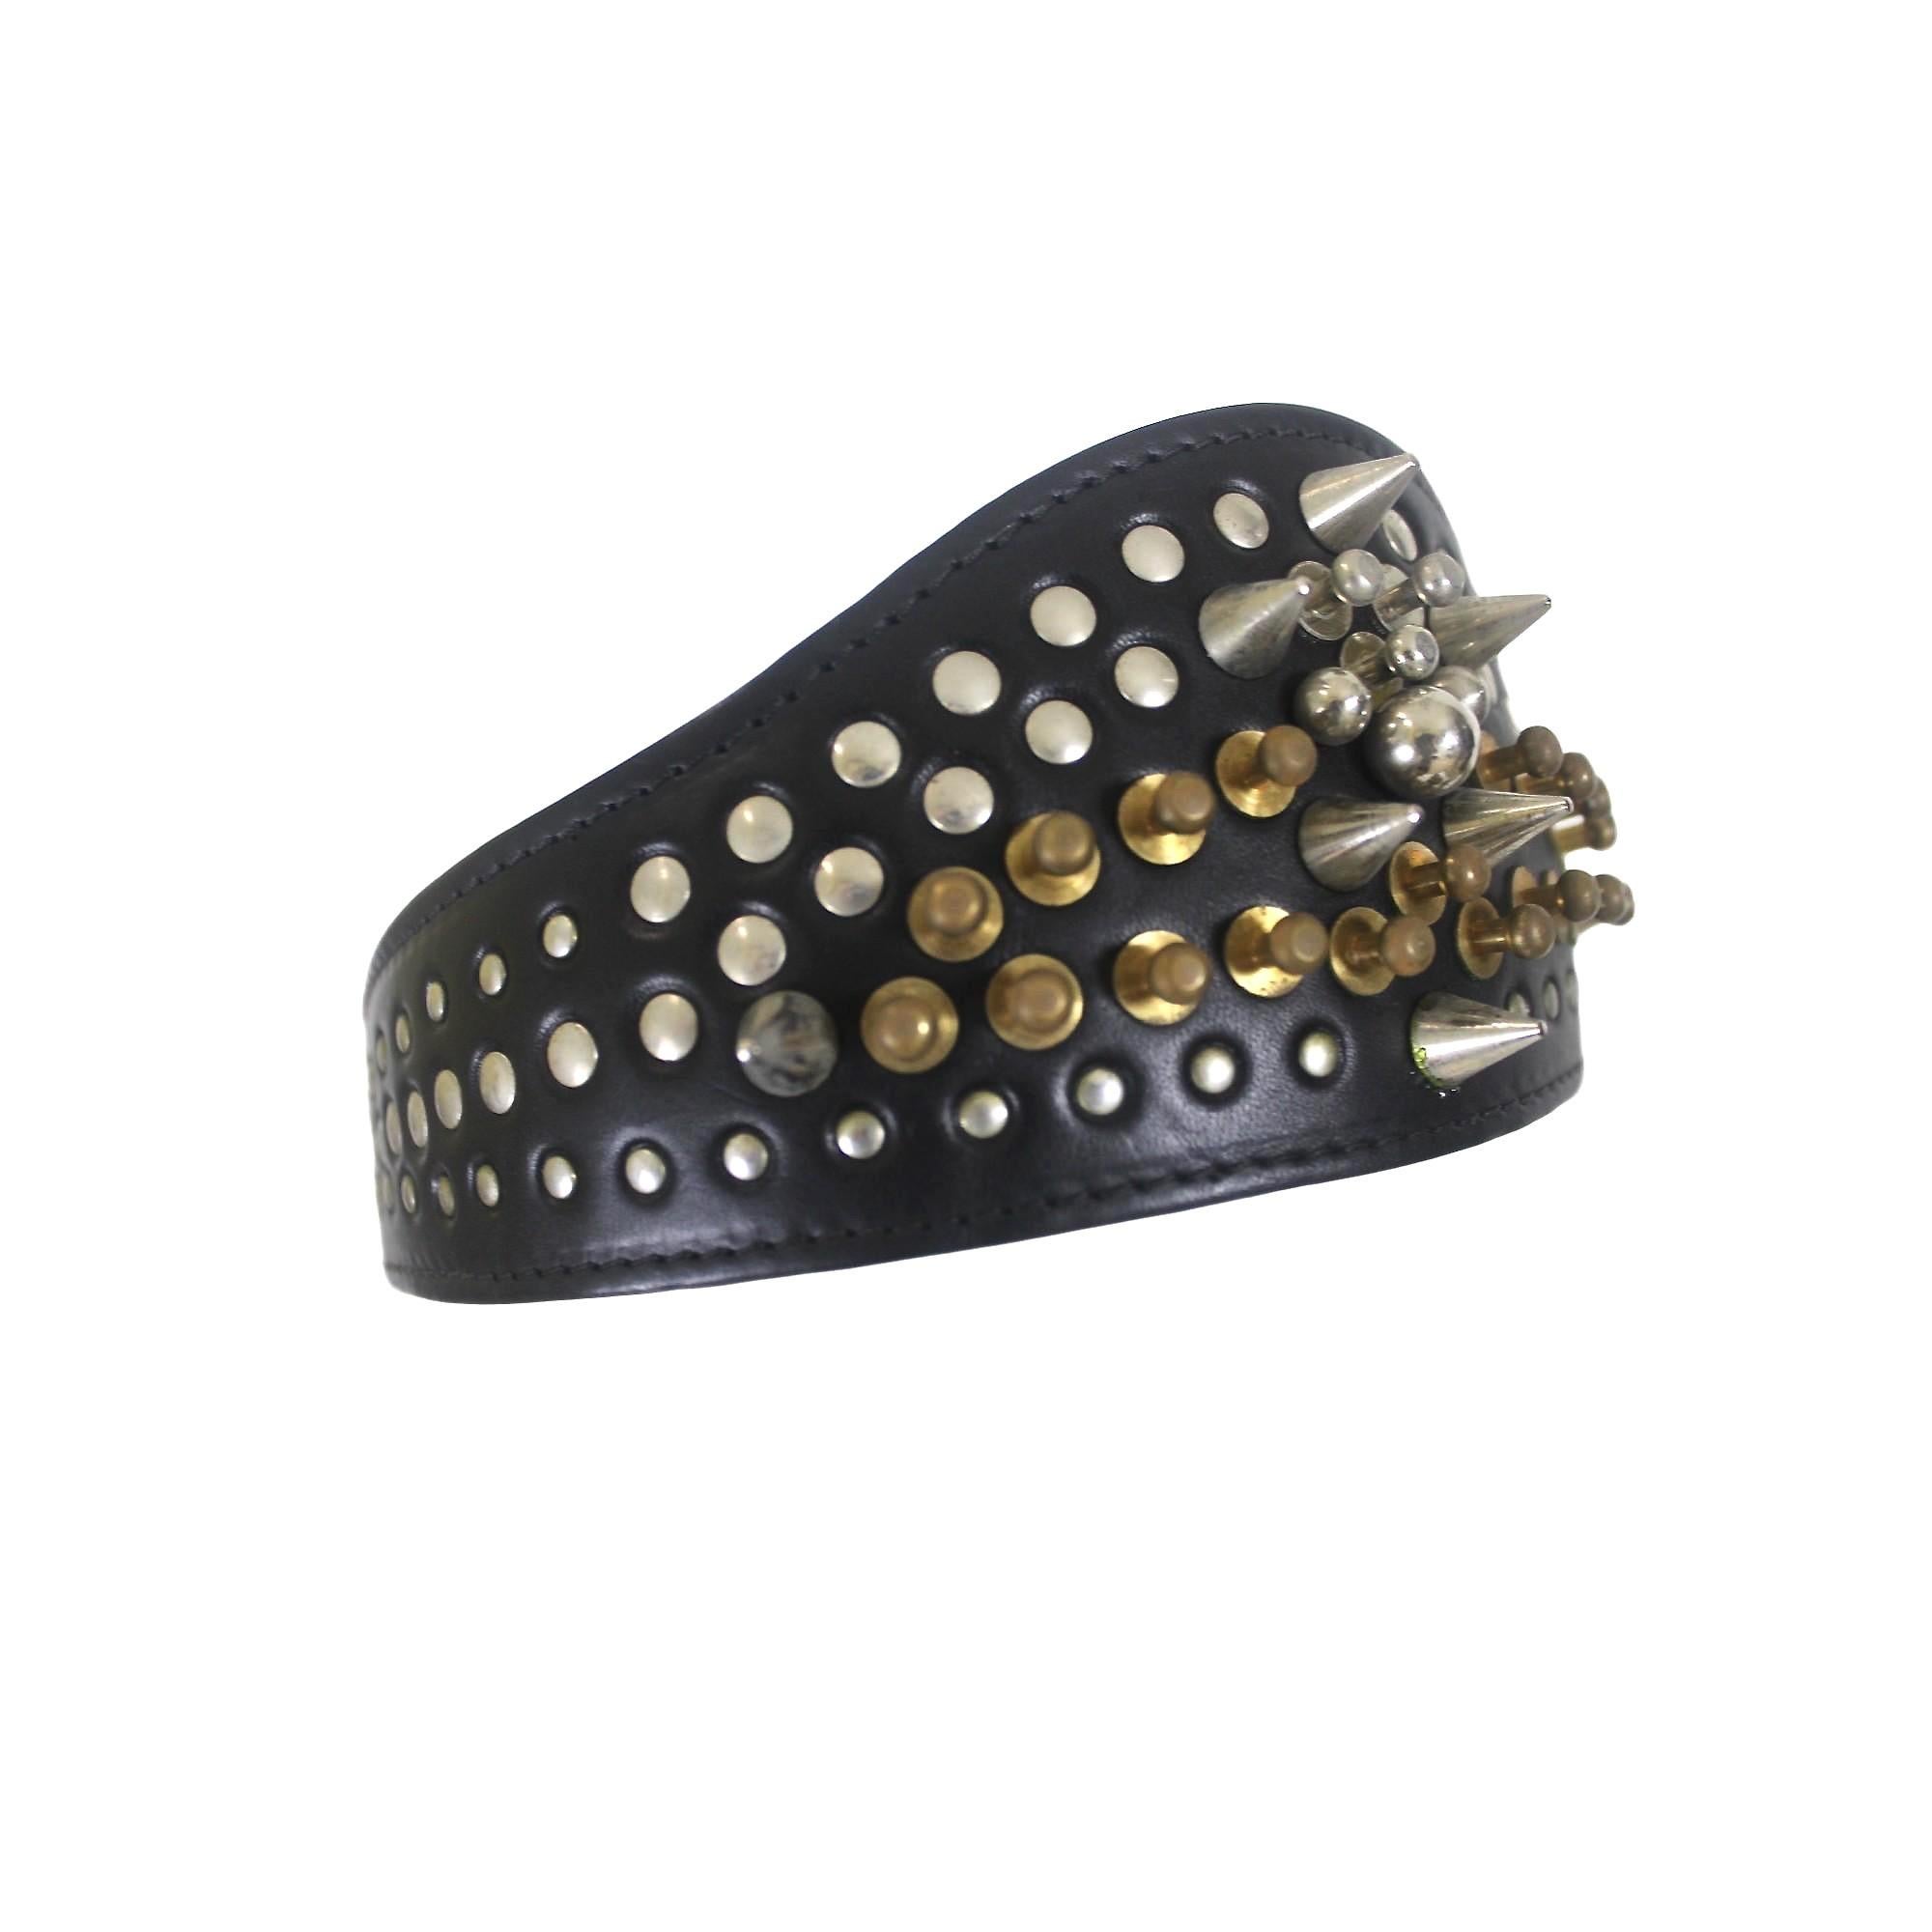 Comme des Garcons Homme Plus Fleet Ilya Leather Studded Headband 2013 In Excellent Condition For Sale In Bath, GB